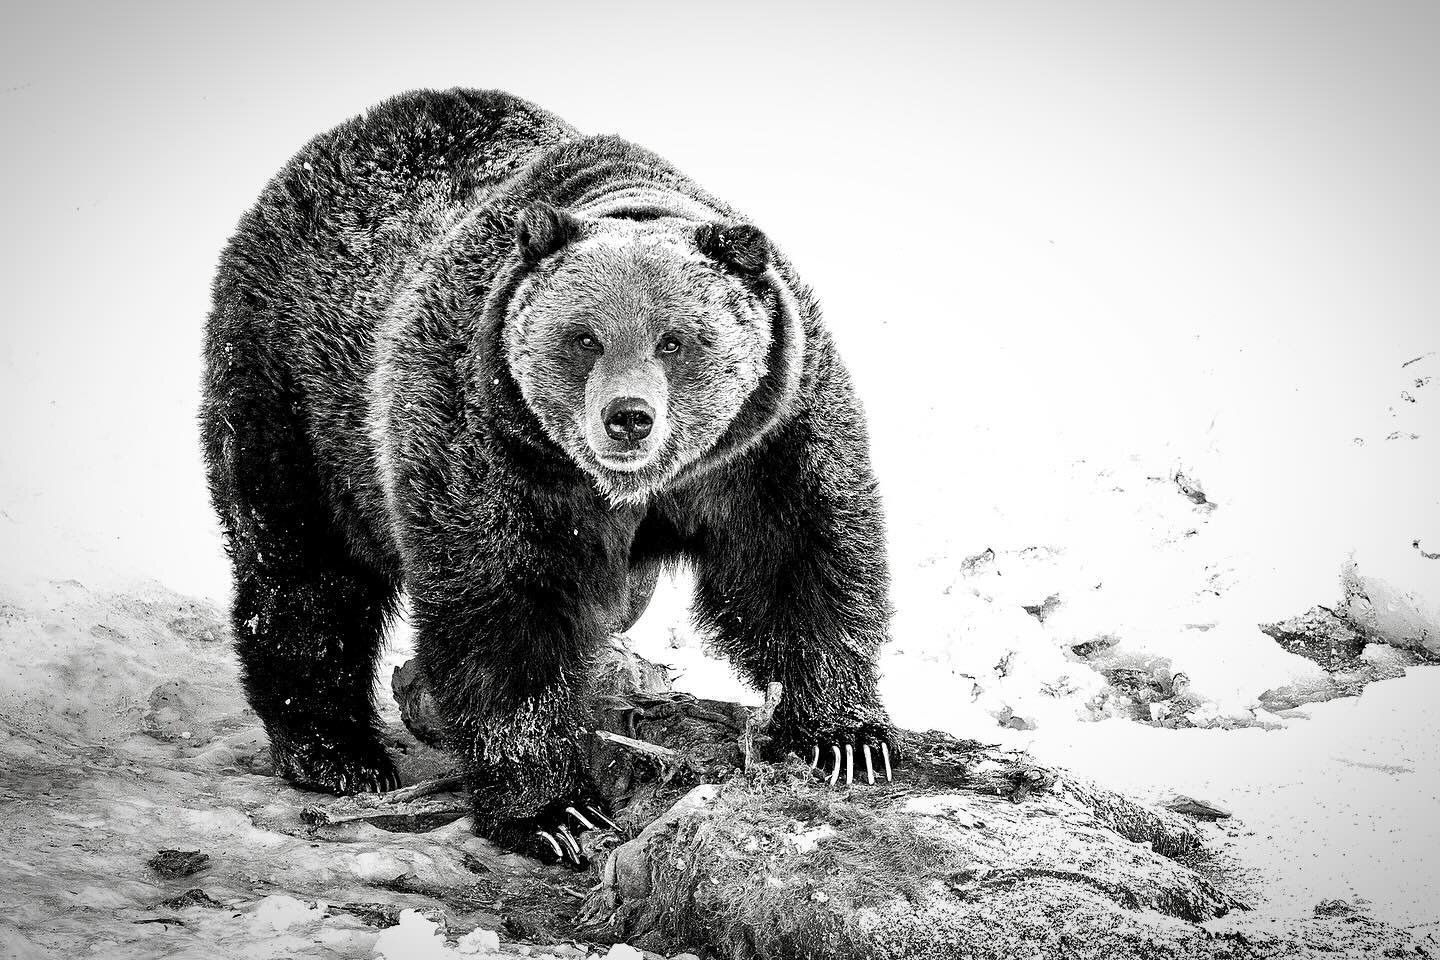 They&rsquo;re back! People have been sharing photos and videos from the high-elevation interior of Yellowstone of grizzly boars beginning to roam once again. Remember, they&rsquo;re hangry! The first grizzlies, or brown bears, to emerge are typically